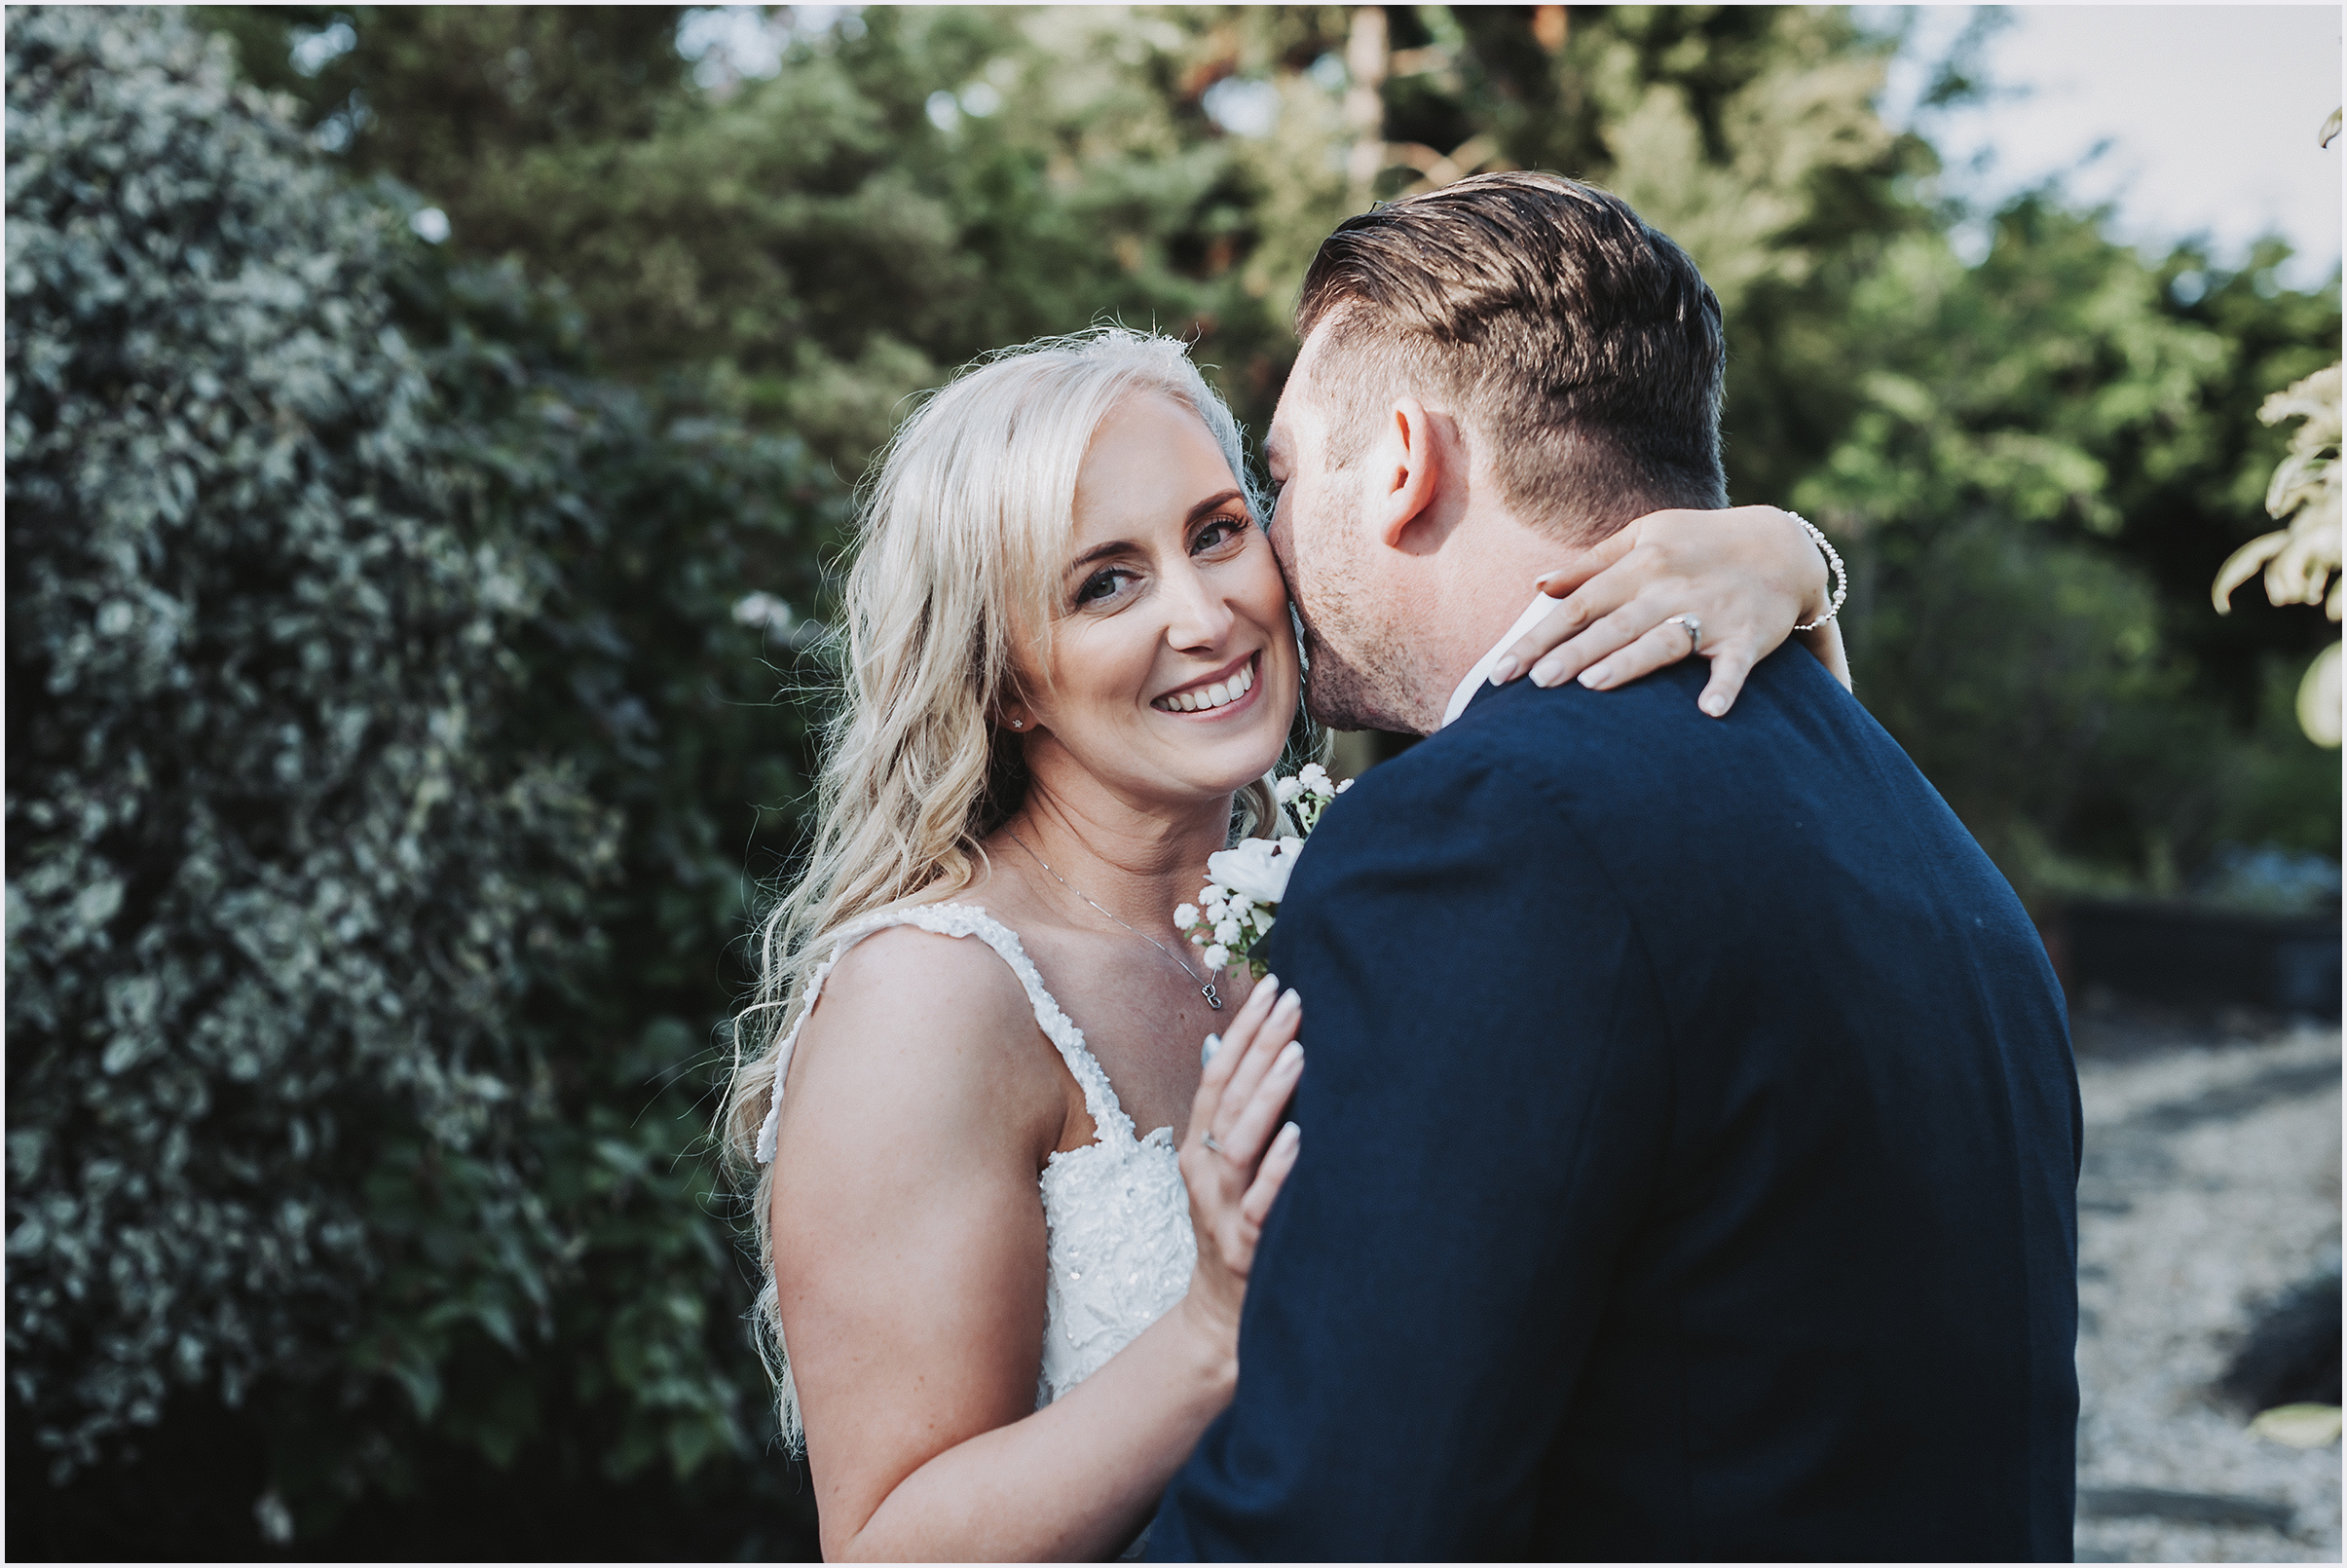 A groom whispers into his wife's ear as she smiles at the camera in the gorgeous gardens at The Grosvenor Pulford Hotel and Spa.